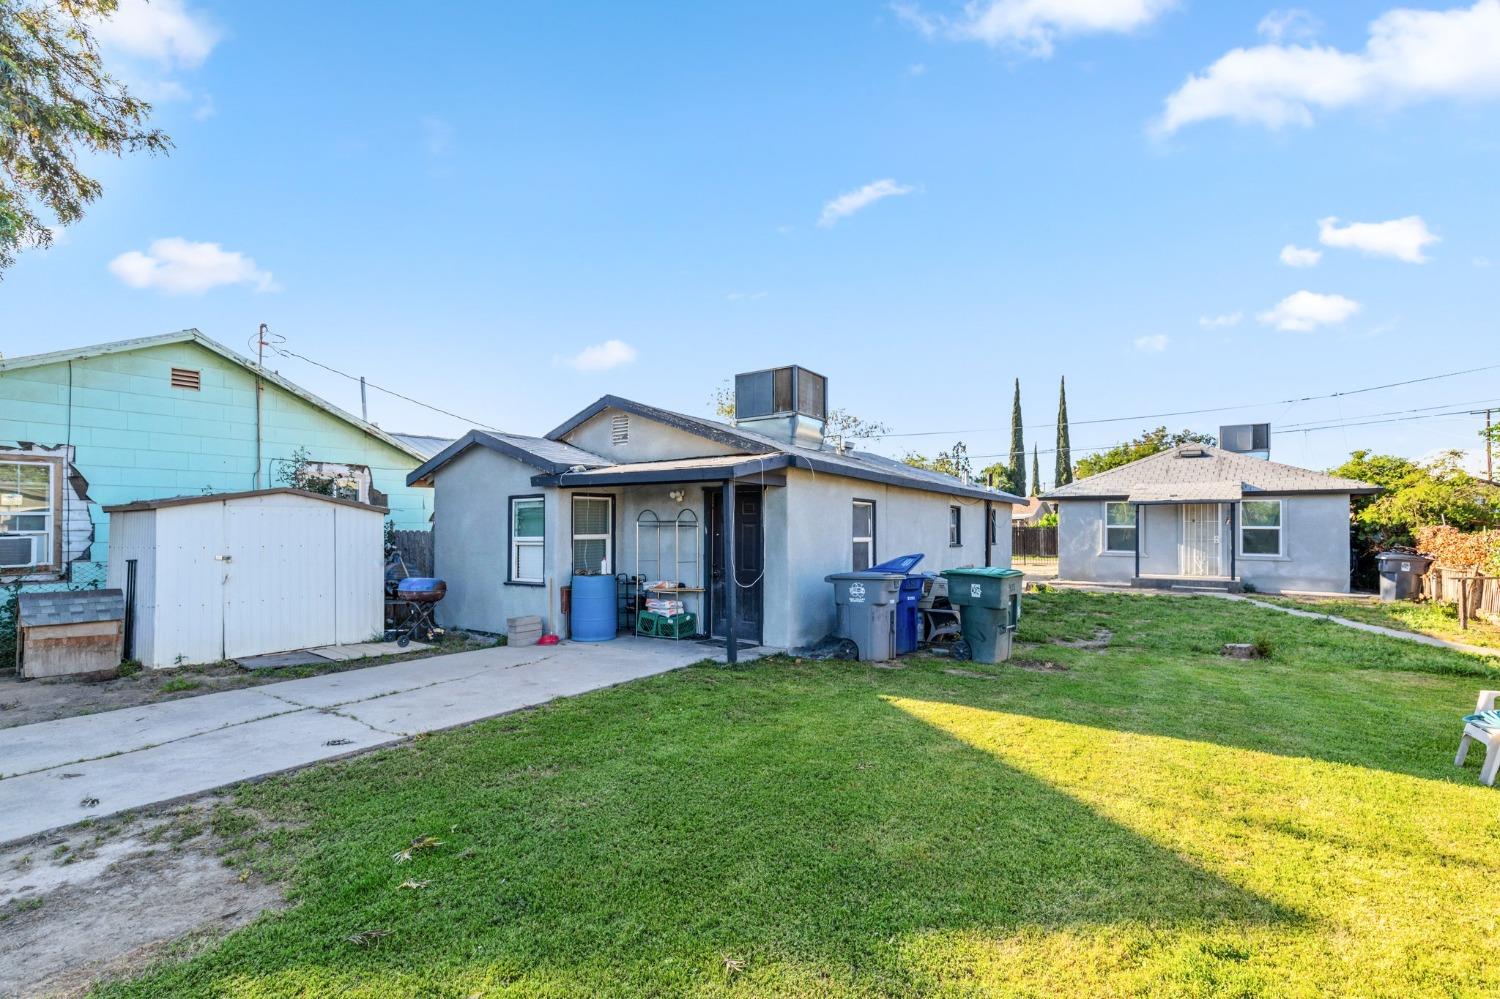 Photo of 925 E Lincoln Ave in Madera, CA